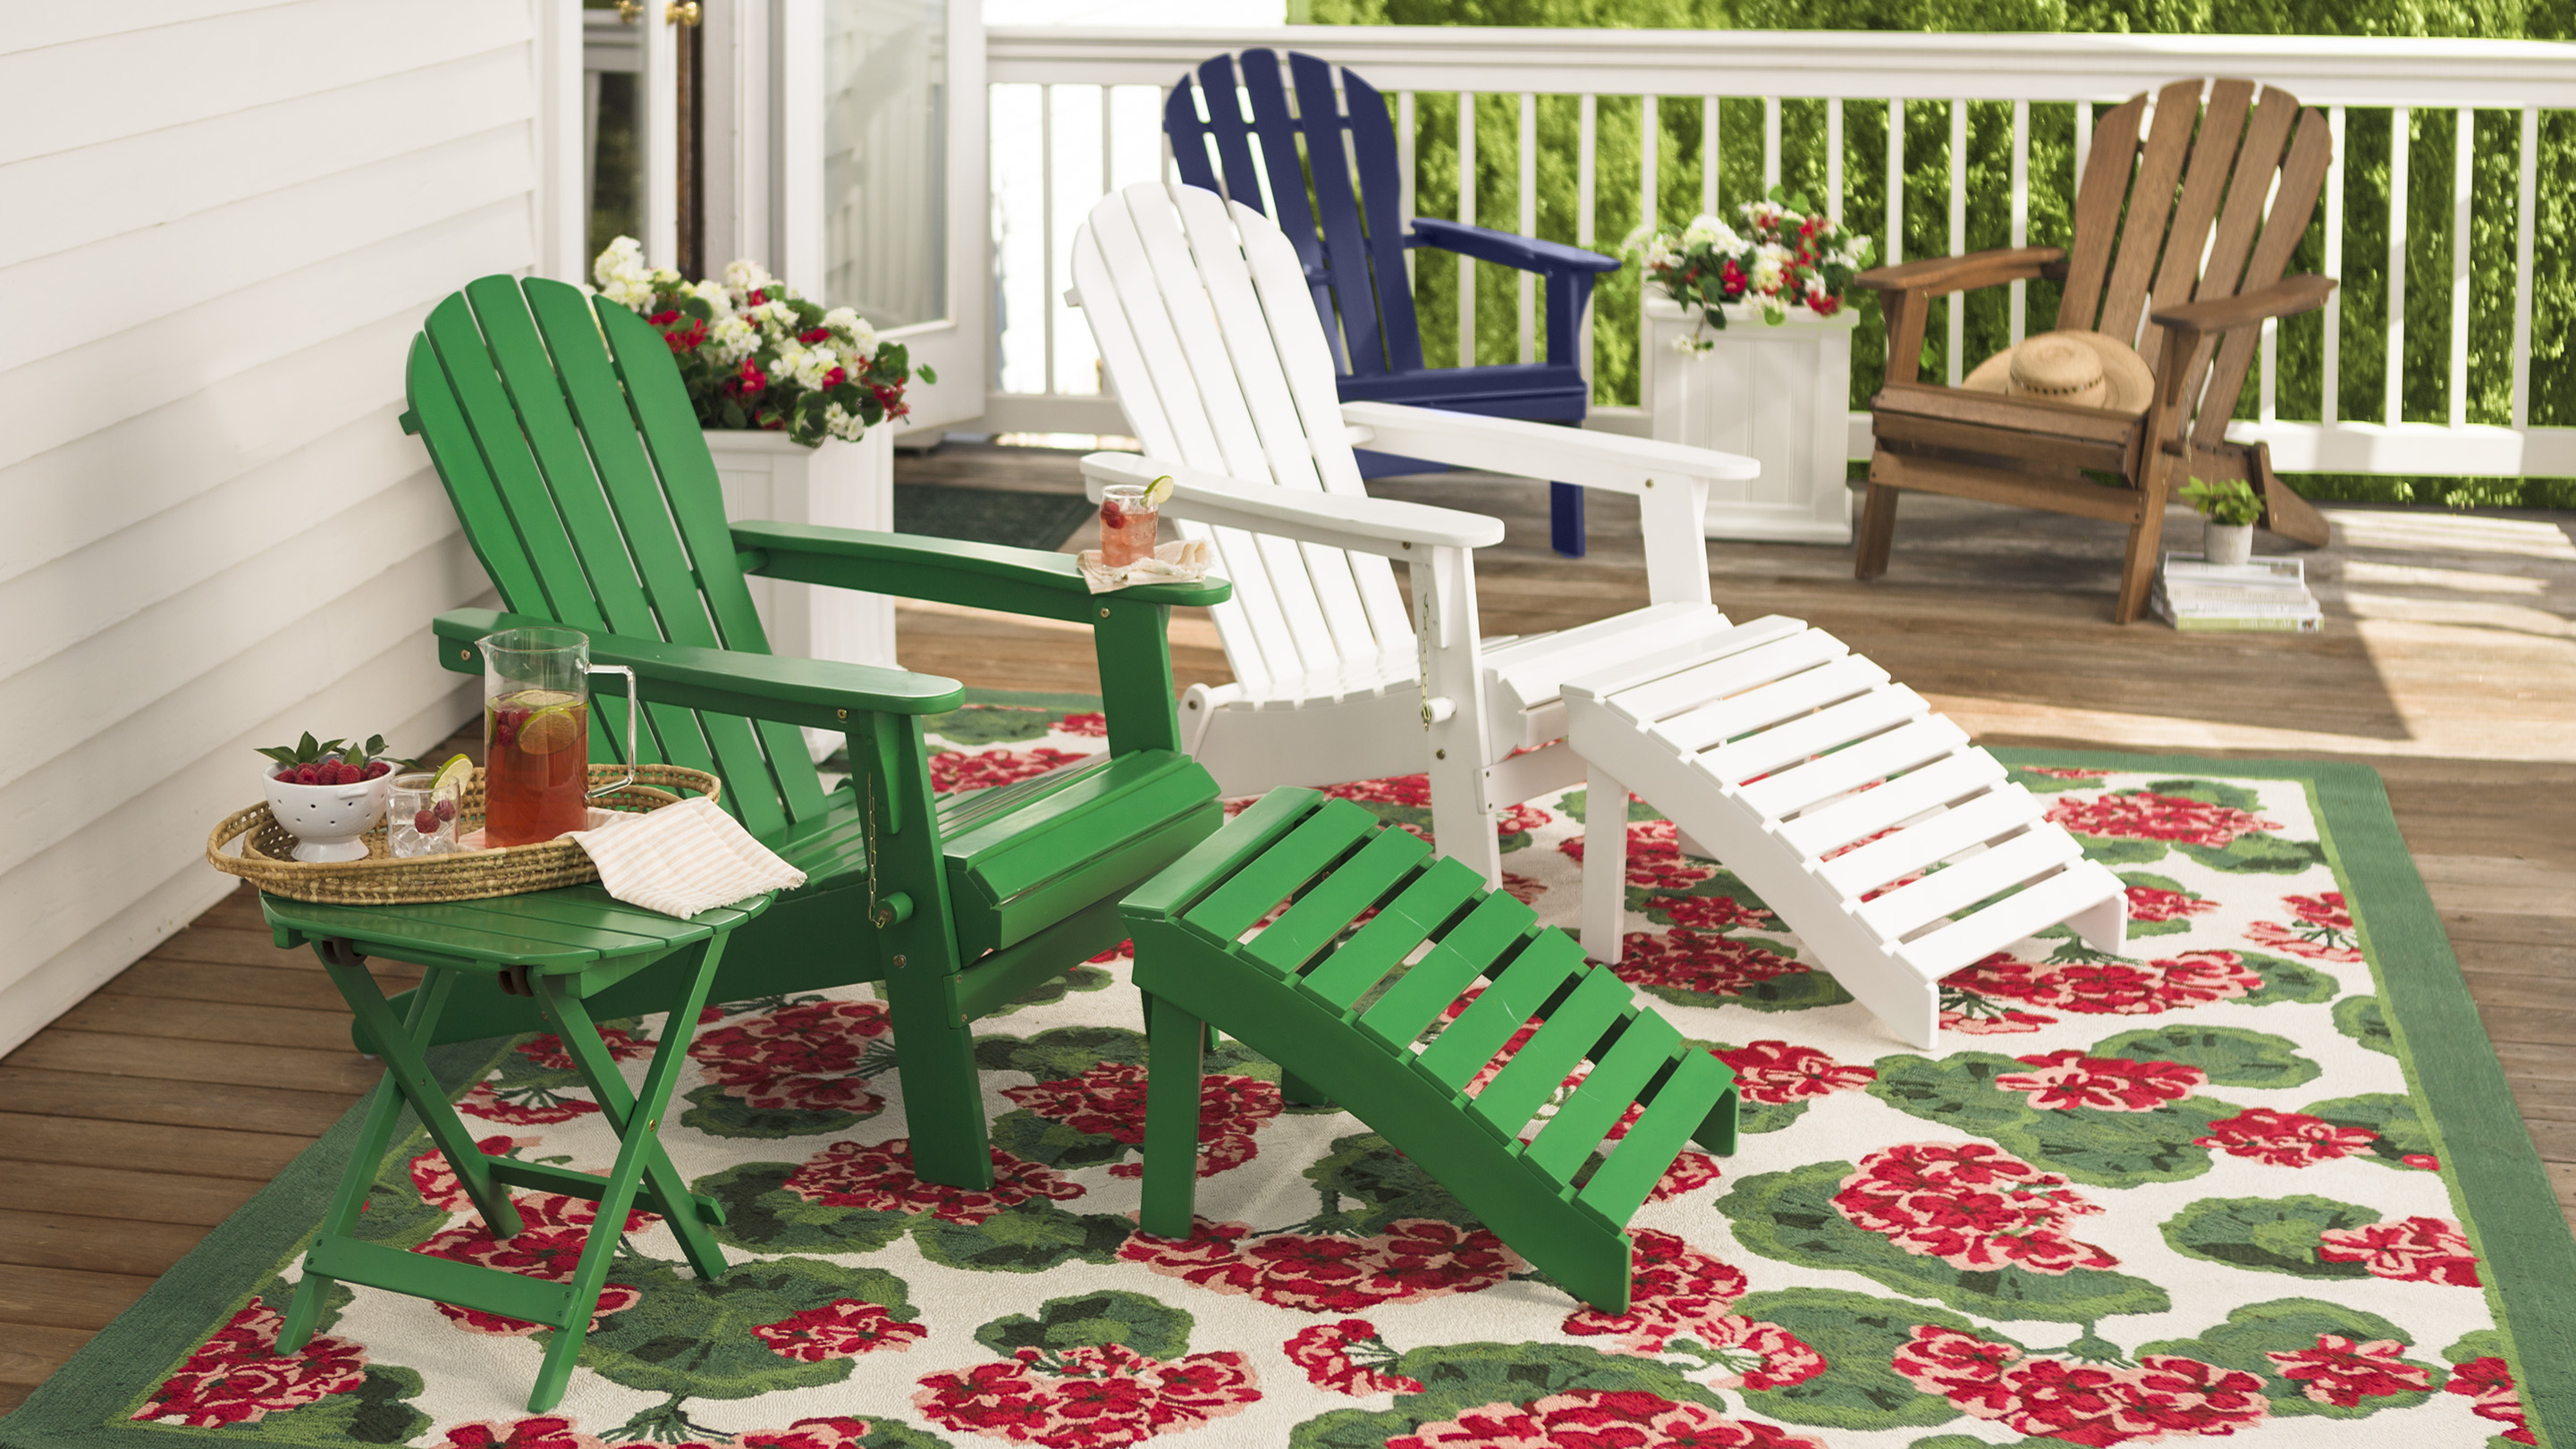 Plow & Hearth Wooden Adirondack Chair - White Paint - image 3 of 3